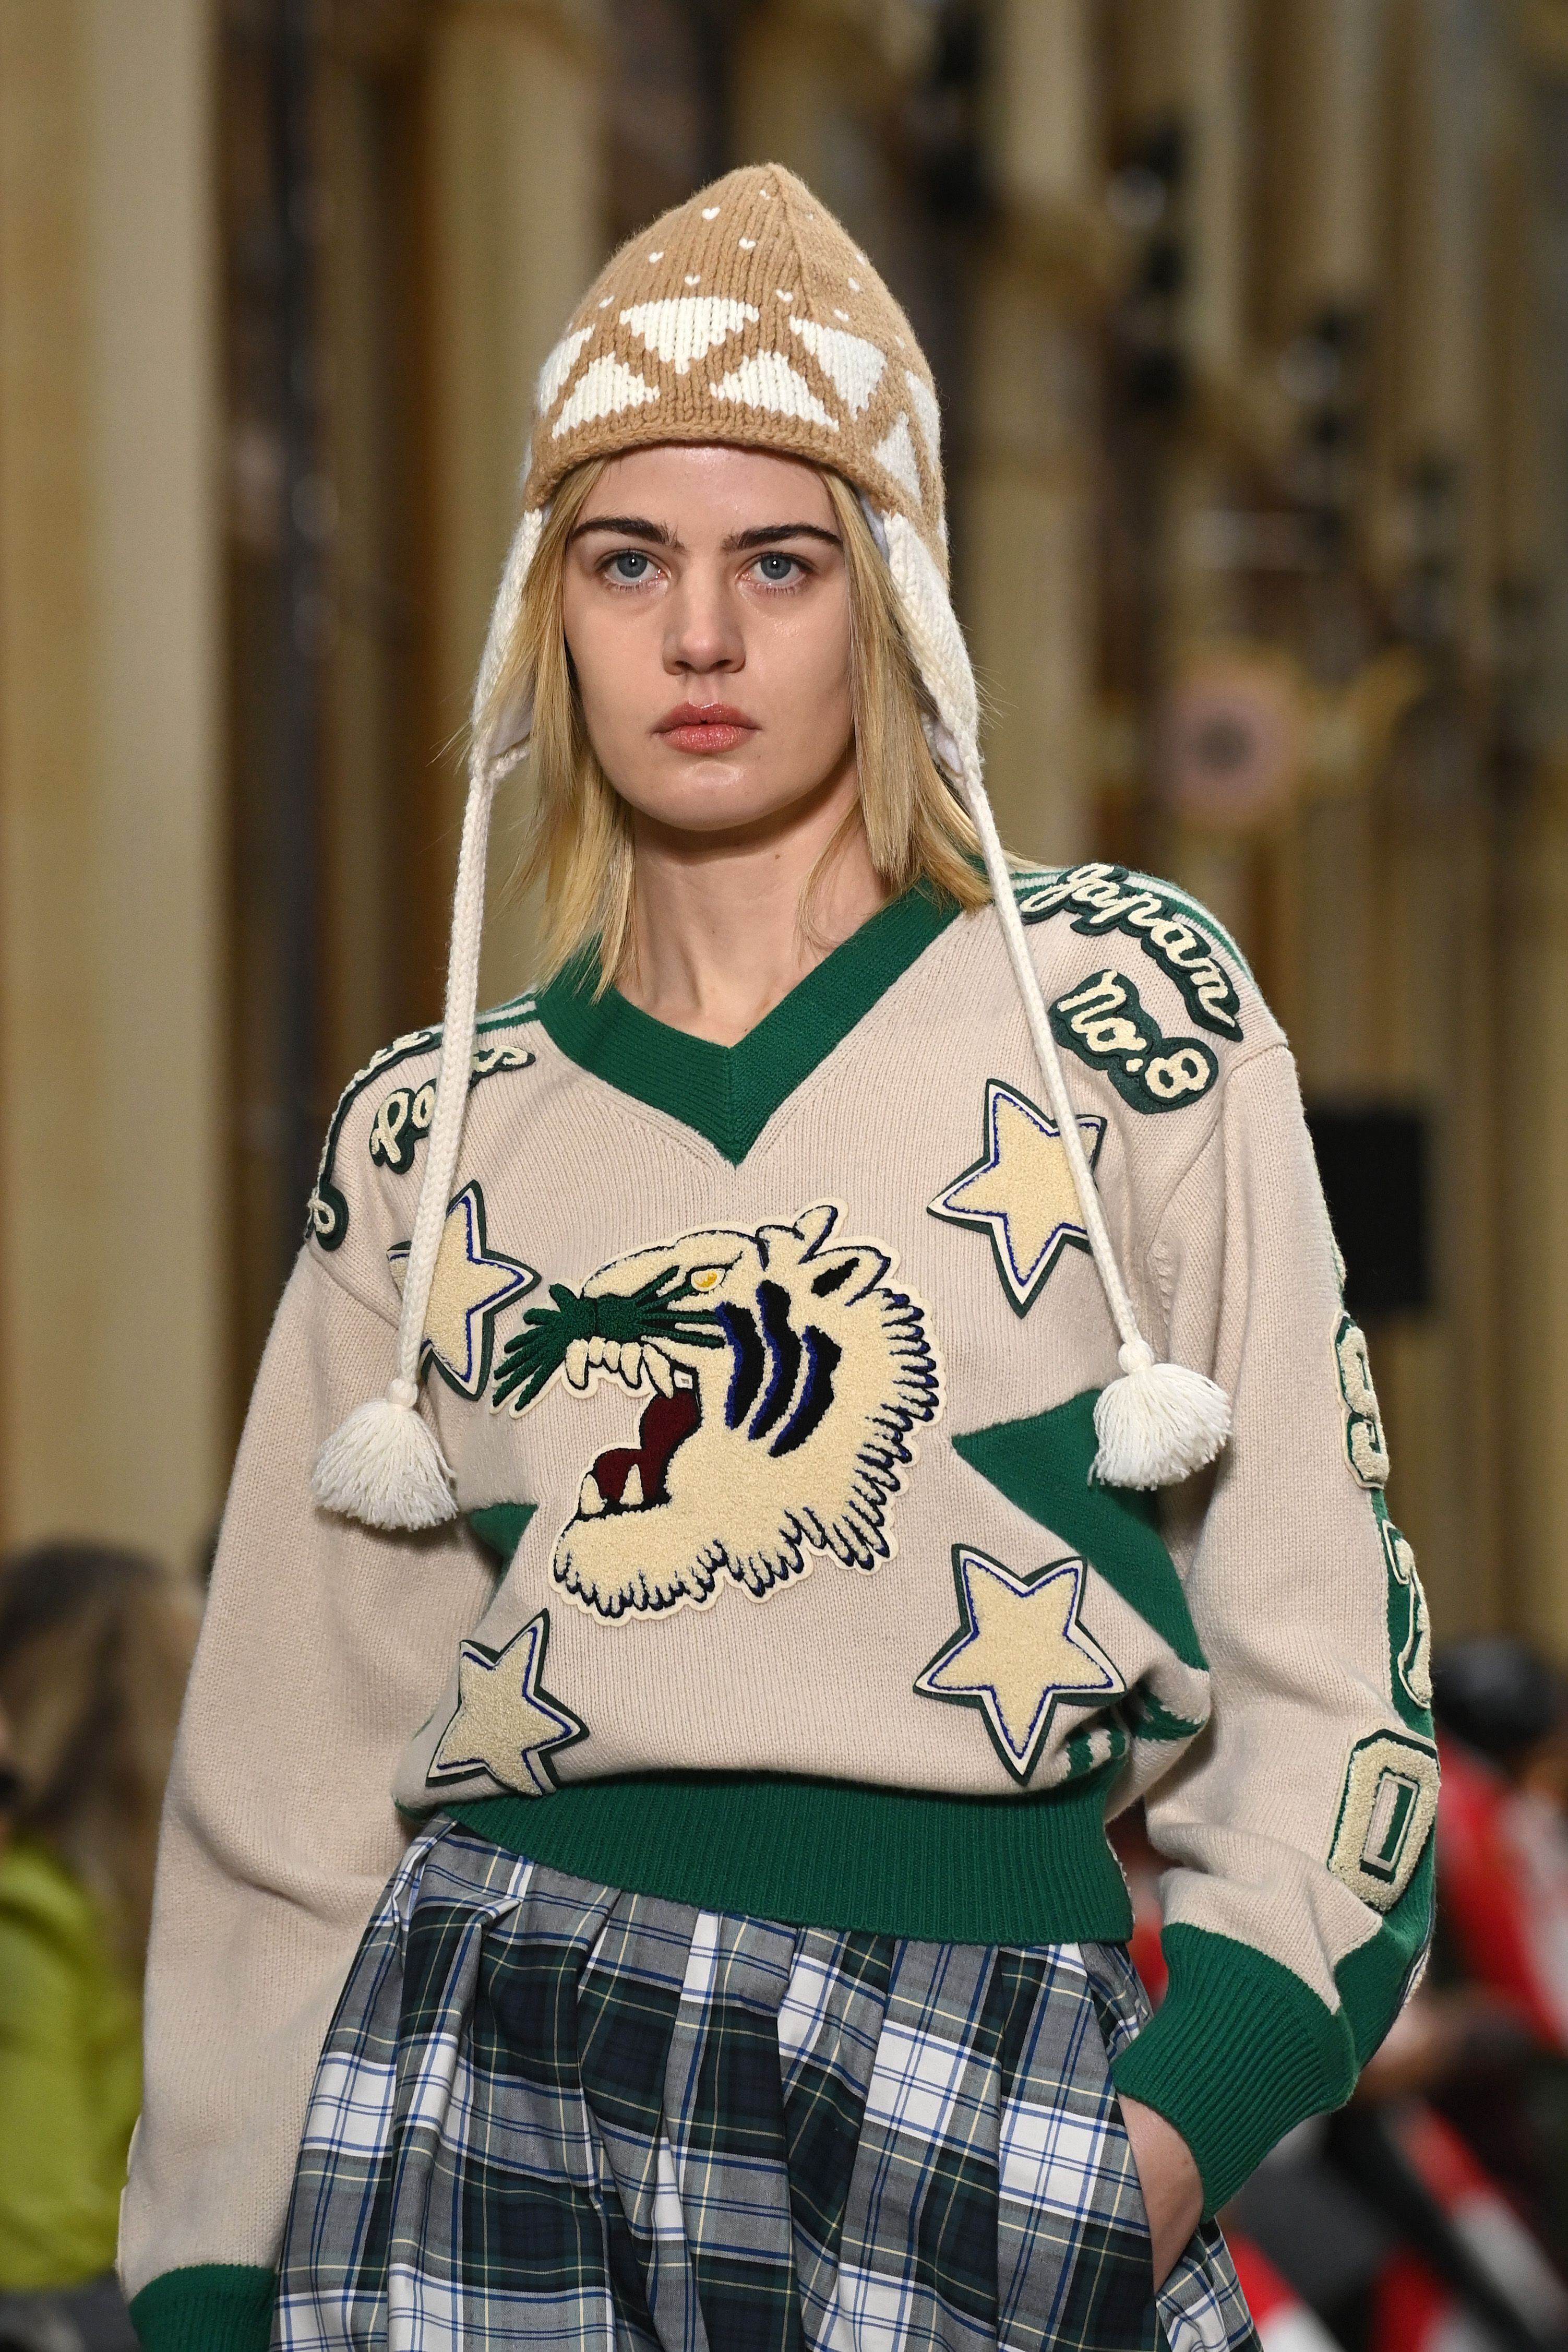 Kenzo autumn/winter 2022 collection - in pictures